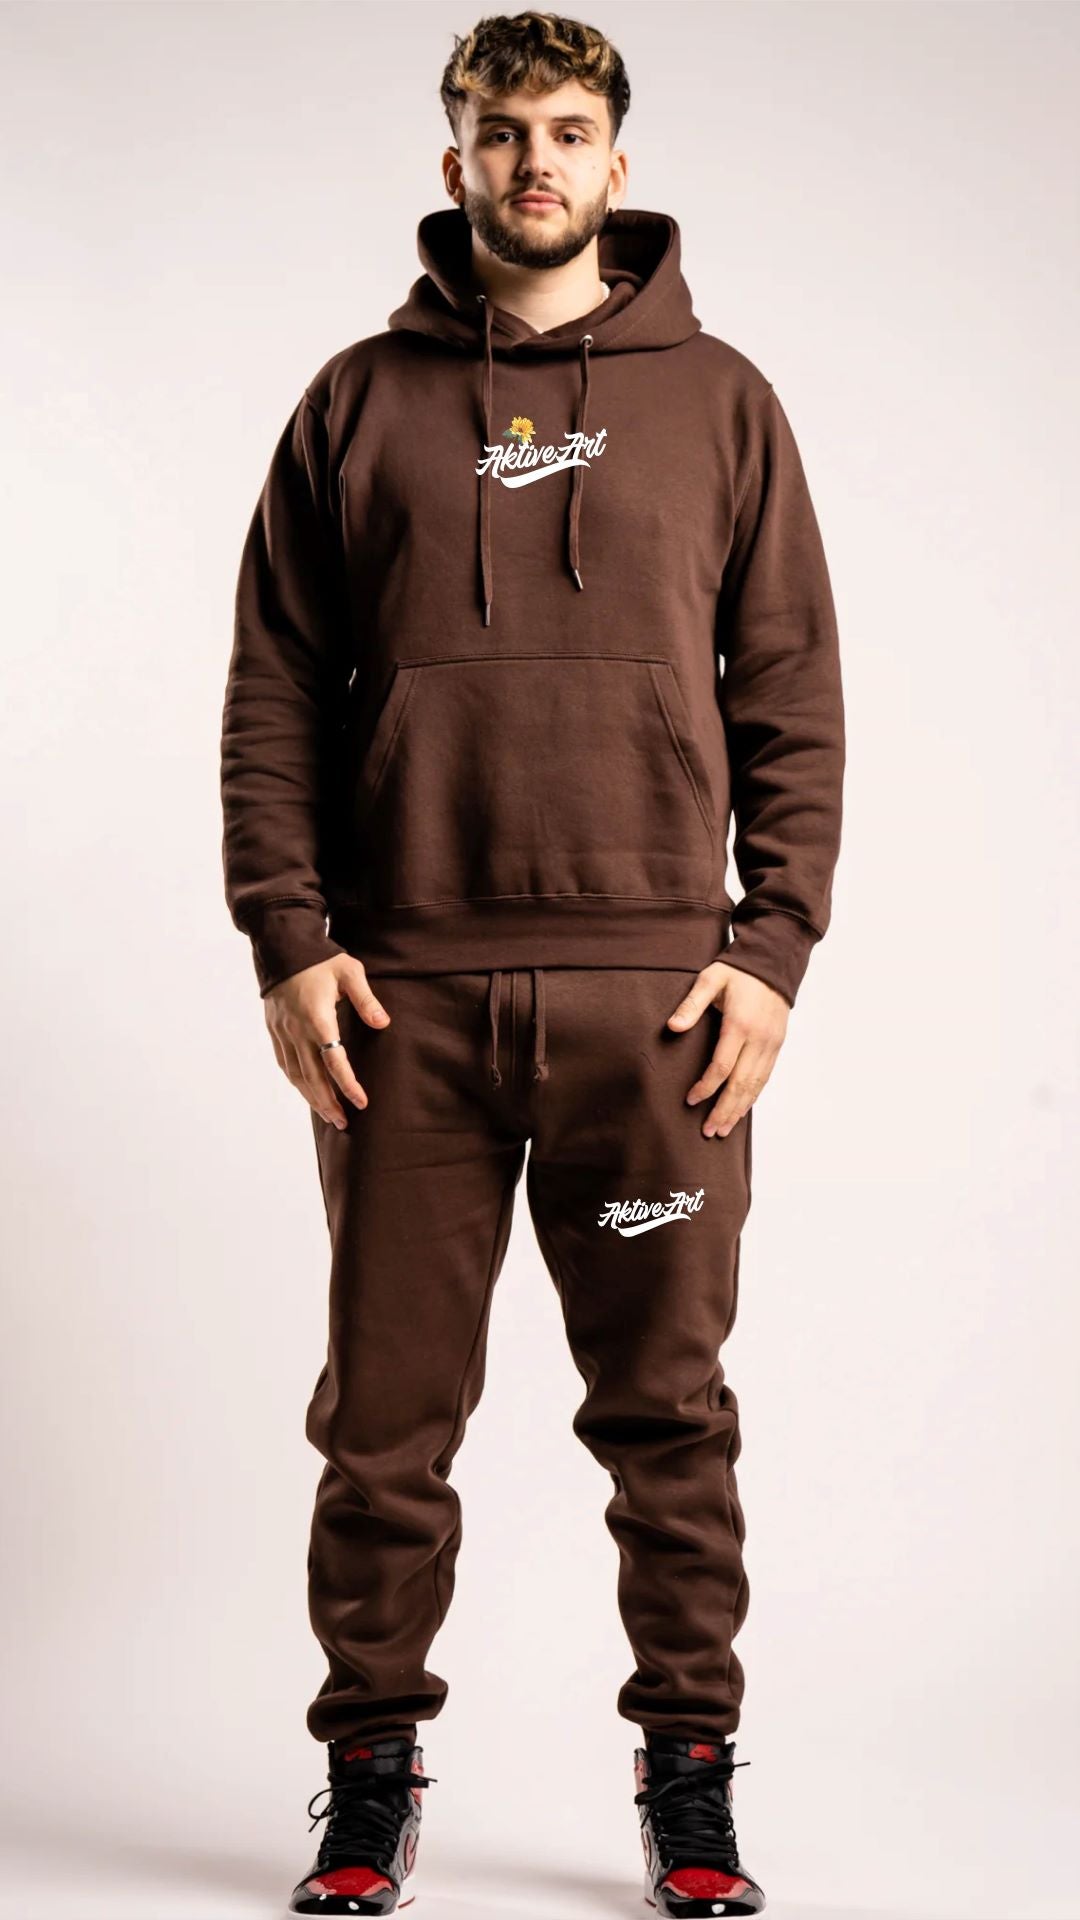 "POWER FROM WITHIN" FLEECE SWEATSUIT (BROWN)